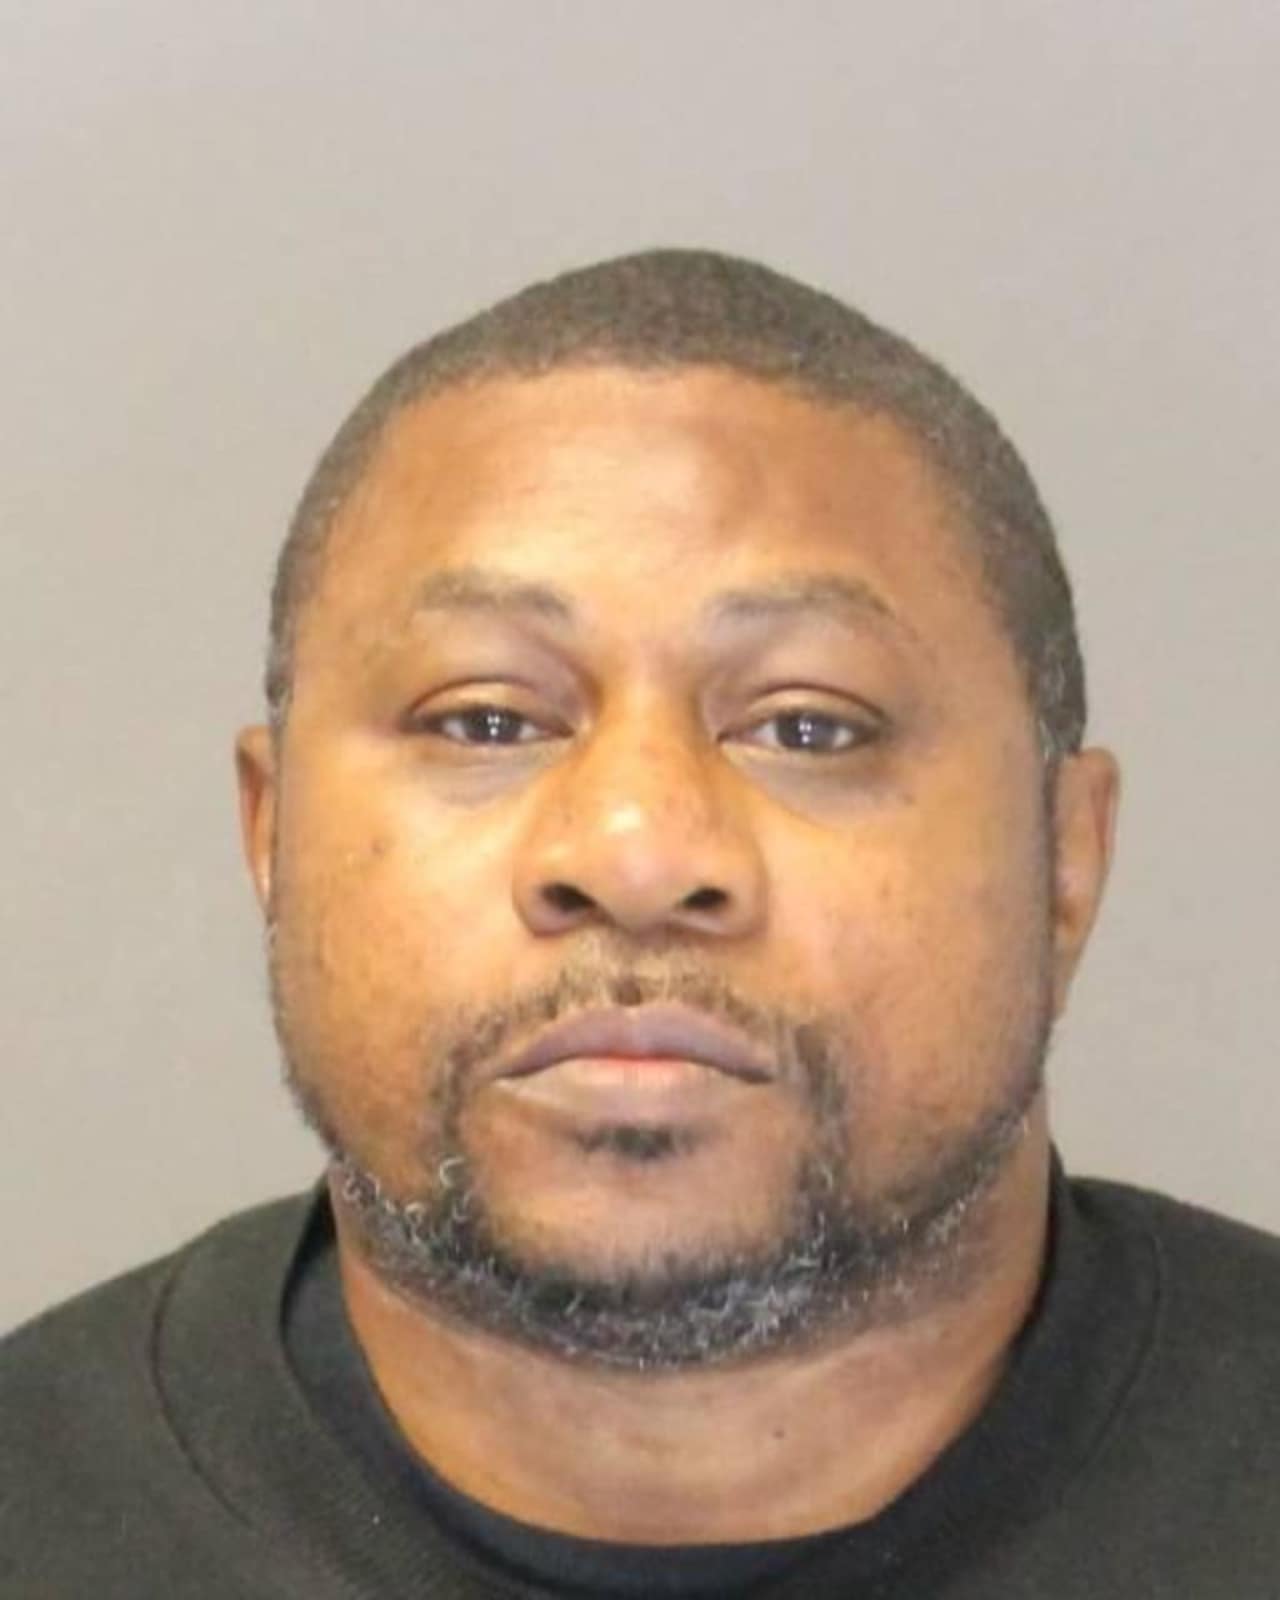 Marlon Bennett, 46, a registered sex offender from New York City, has moved to a home in Rockland County's Spring Valley, according to authorities.